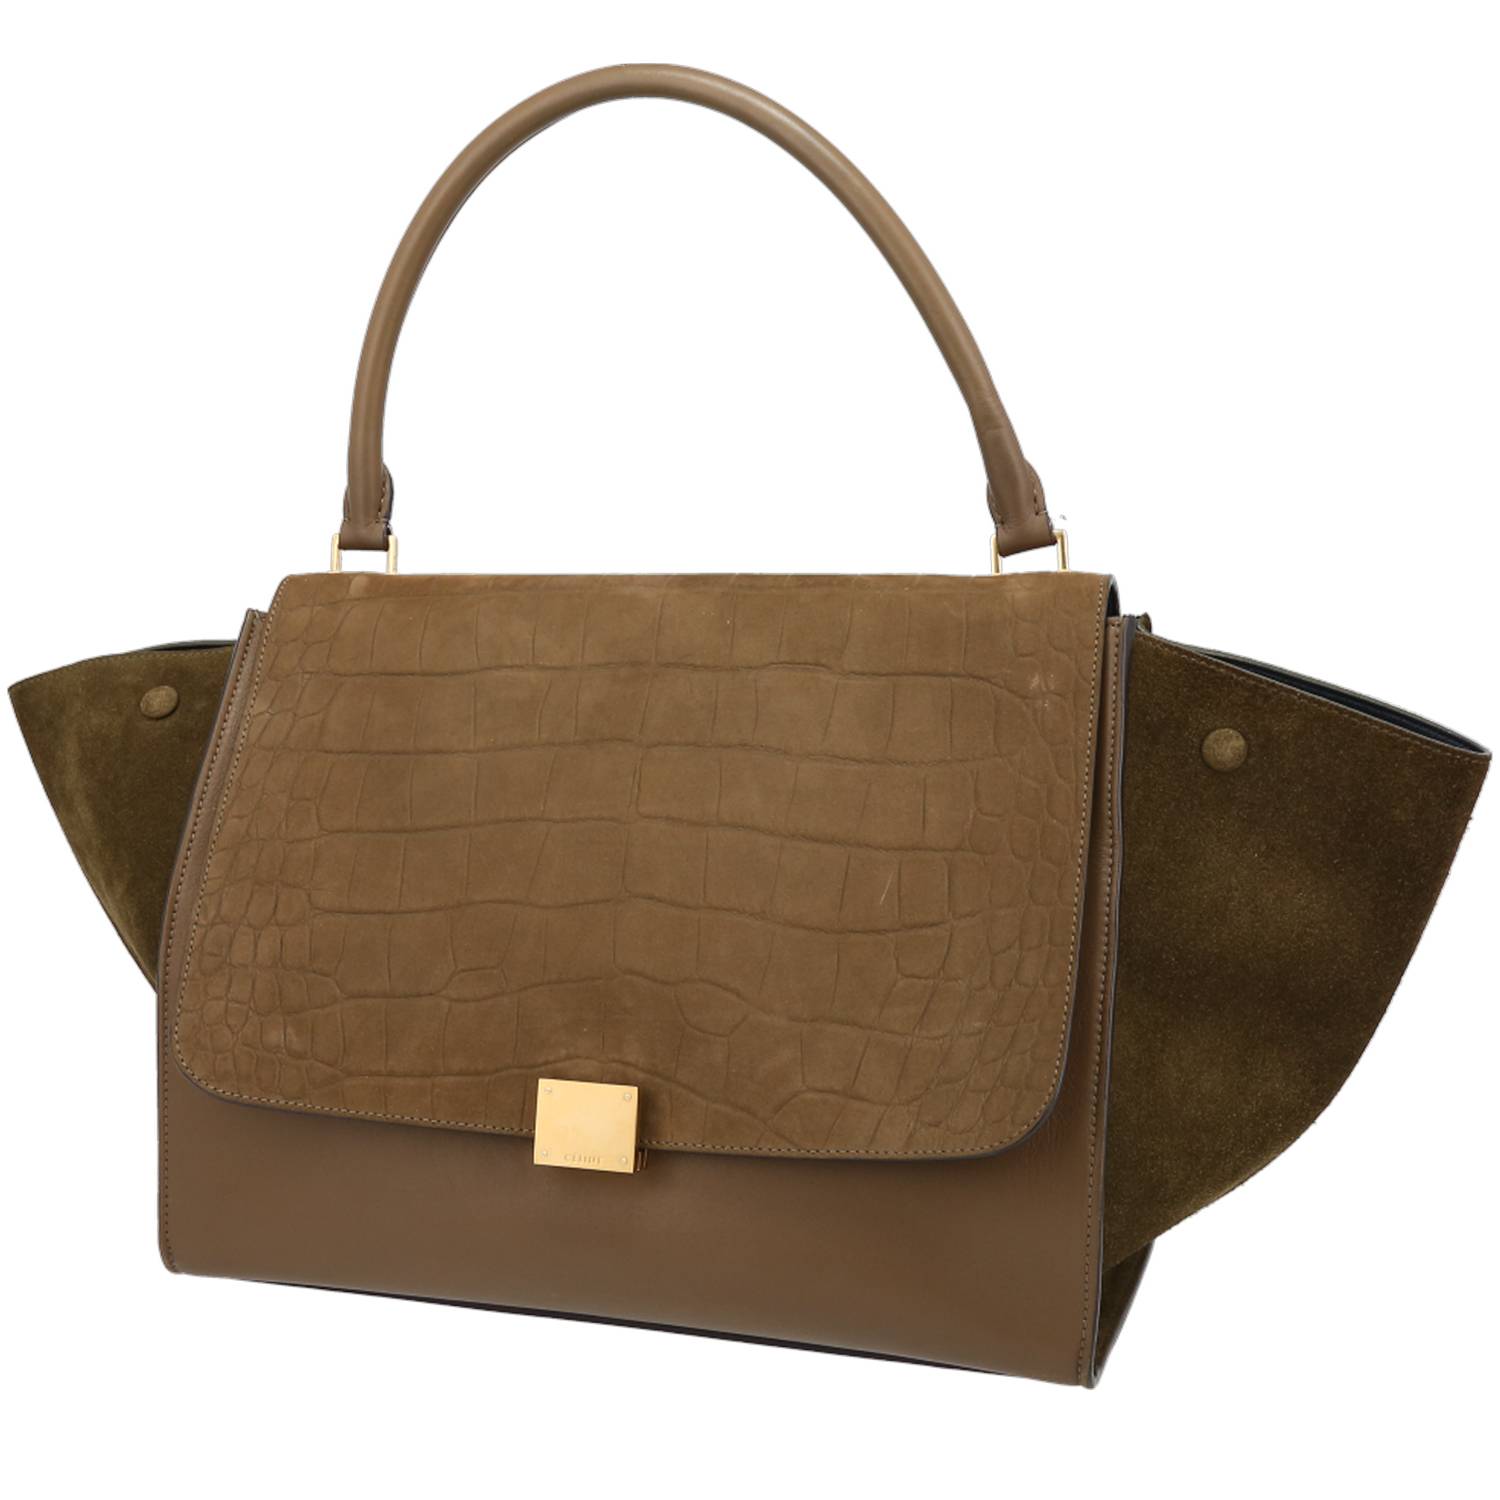 Trapeze Handbag In Brown Leather And Brown Suede